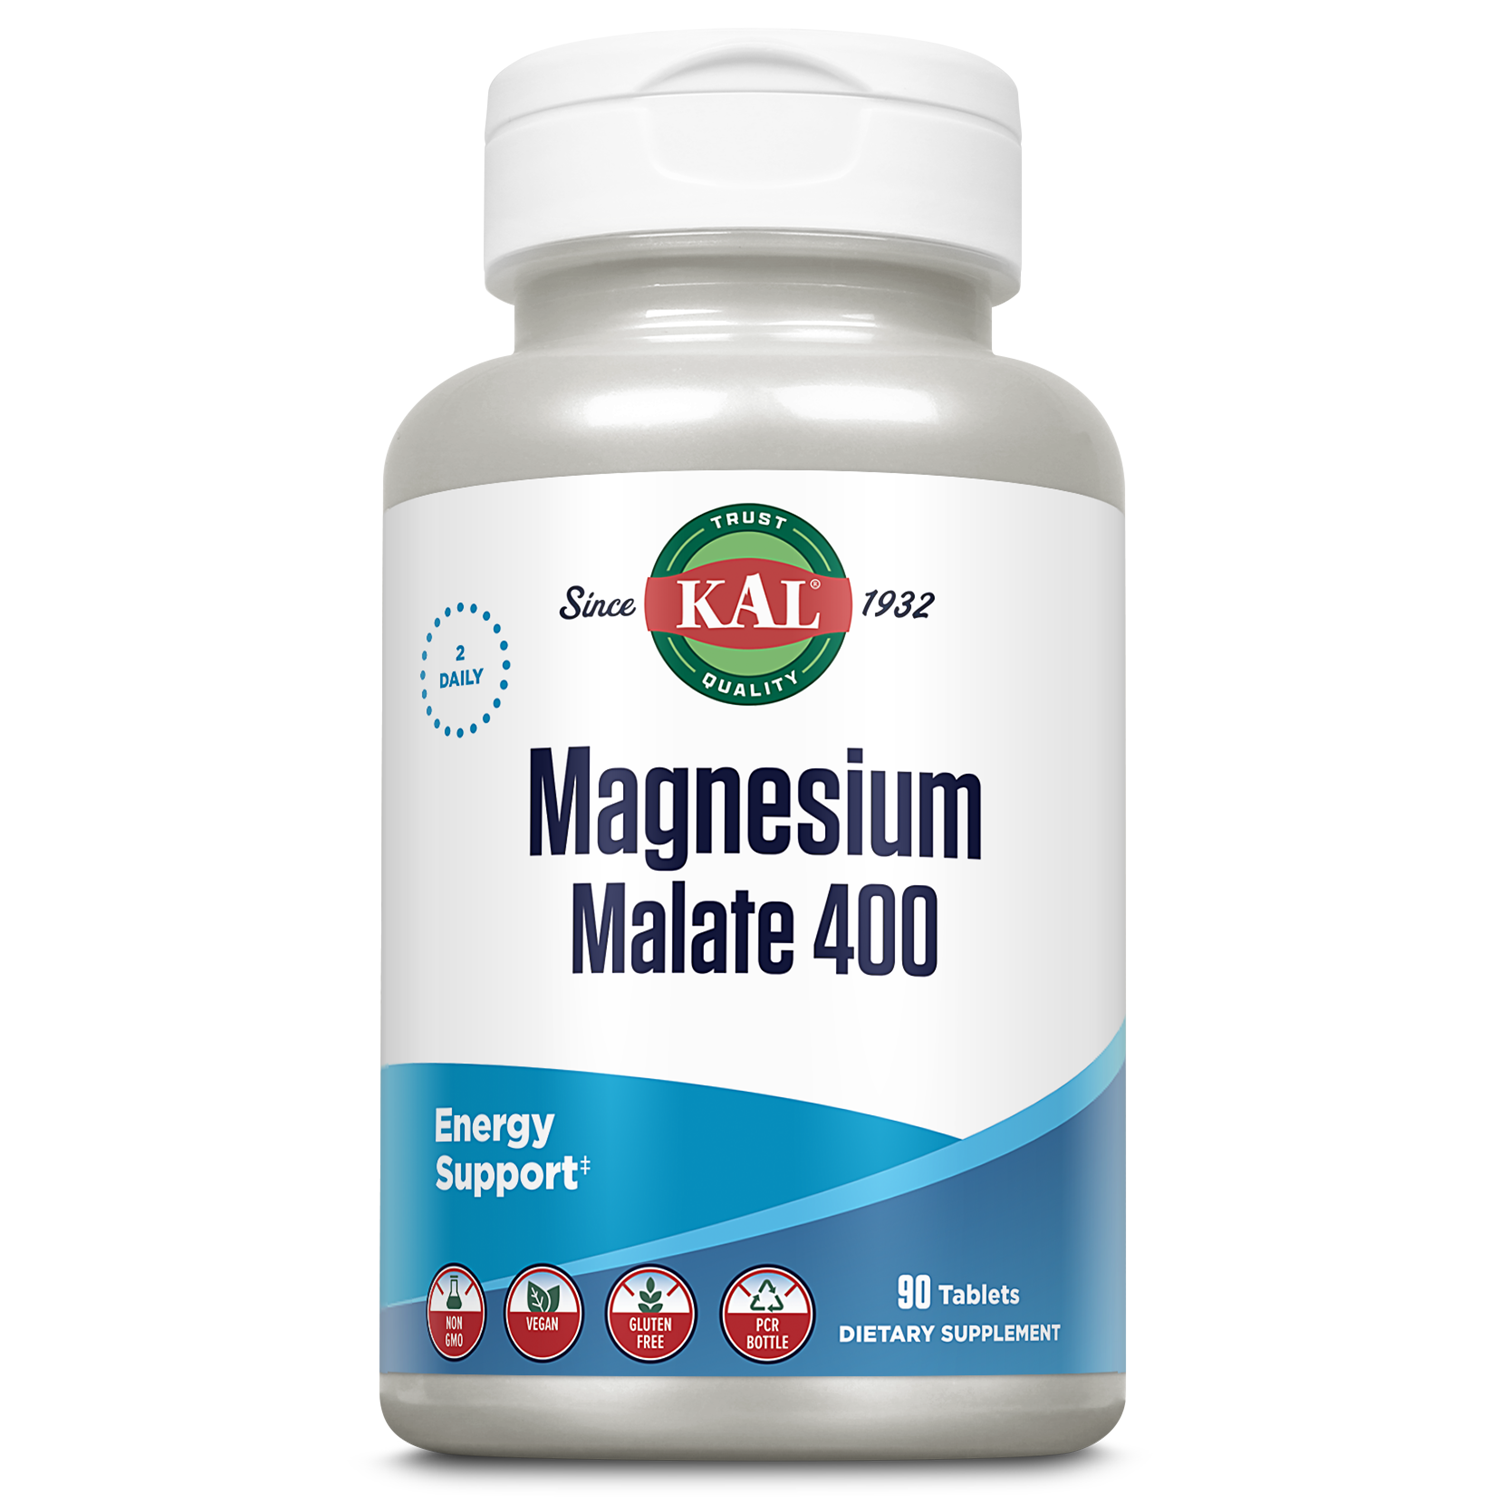 KAL Magnesium Malate 400mg, Chelated Magnesium Supplement with Malic Acid,  Healthy Energy  Muscle Function Support, Enhanced Absorption, Vegan,  60-Day Money Back Guarantee, 45 Servings, 90 Veg Tabs